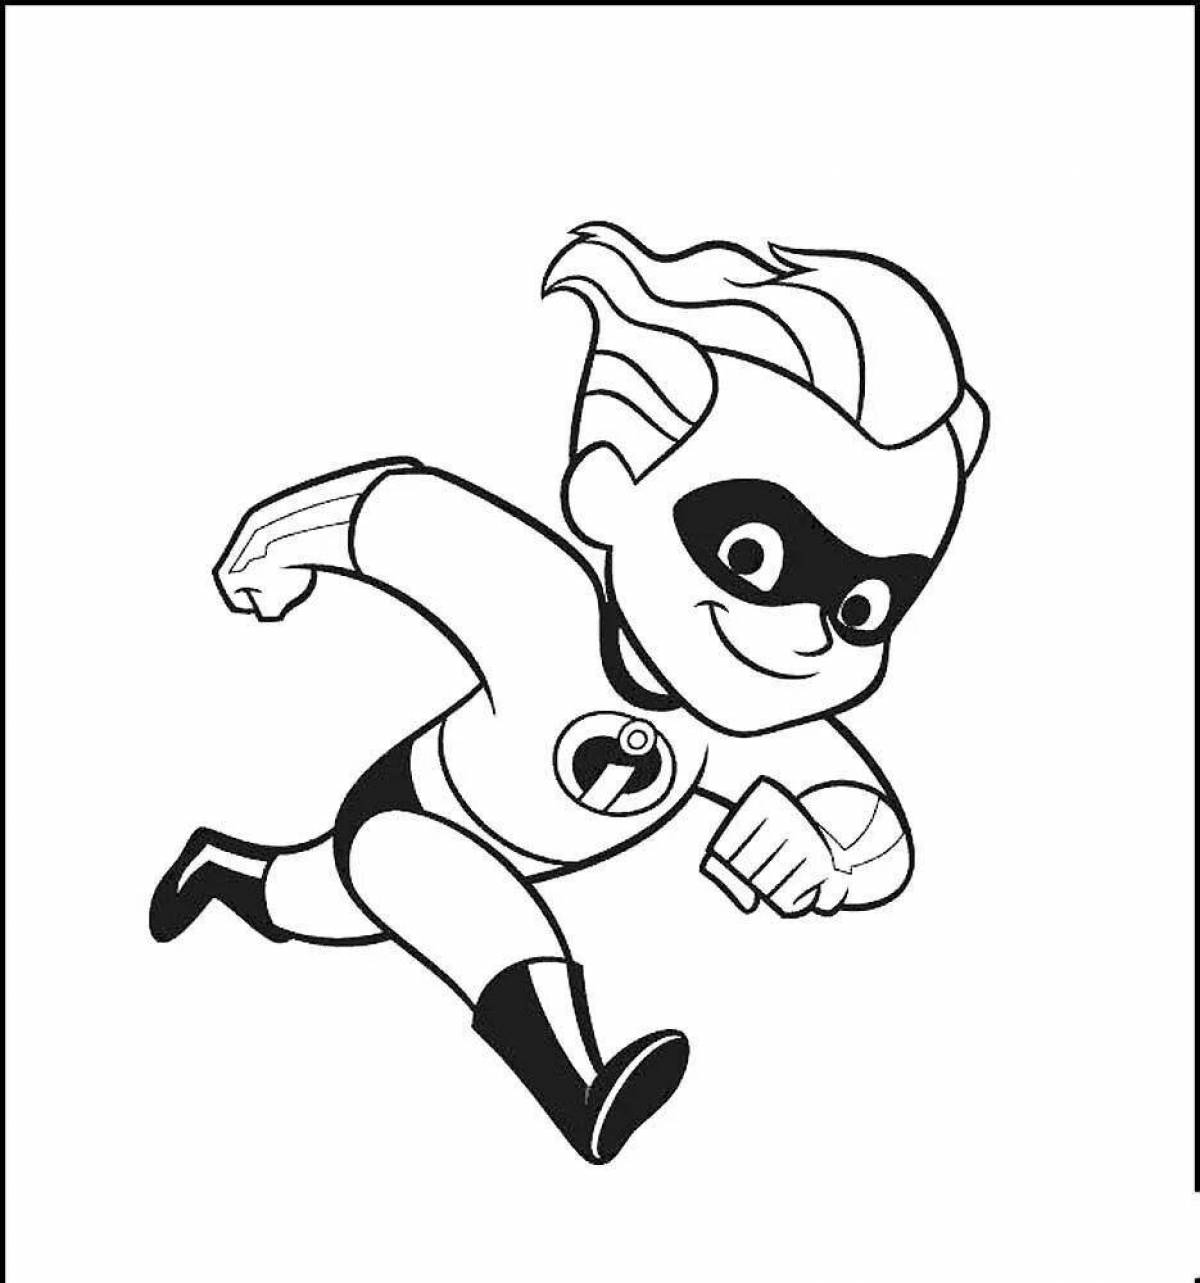 Hip Incredibles coloring book for kids